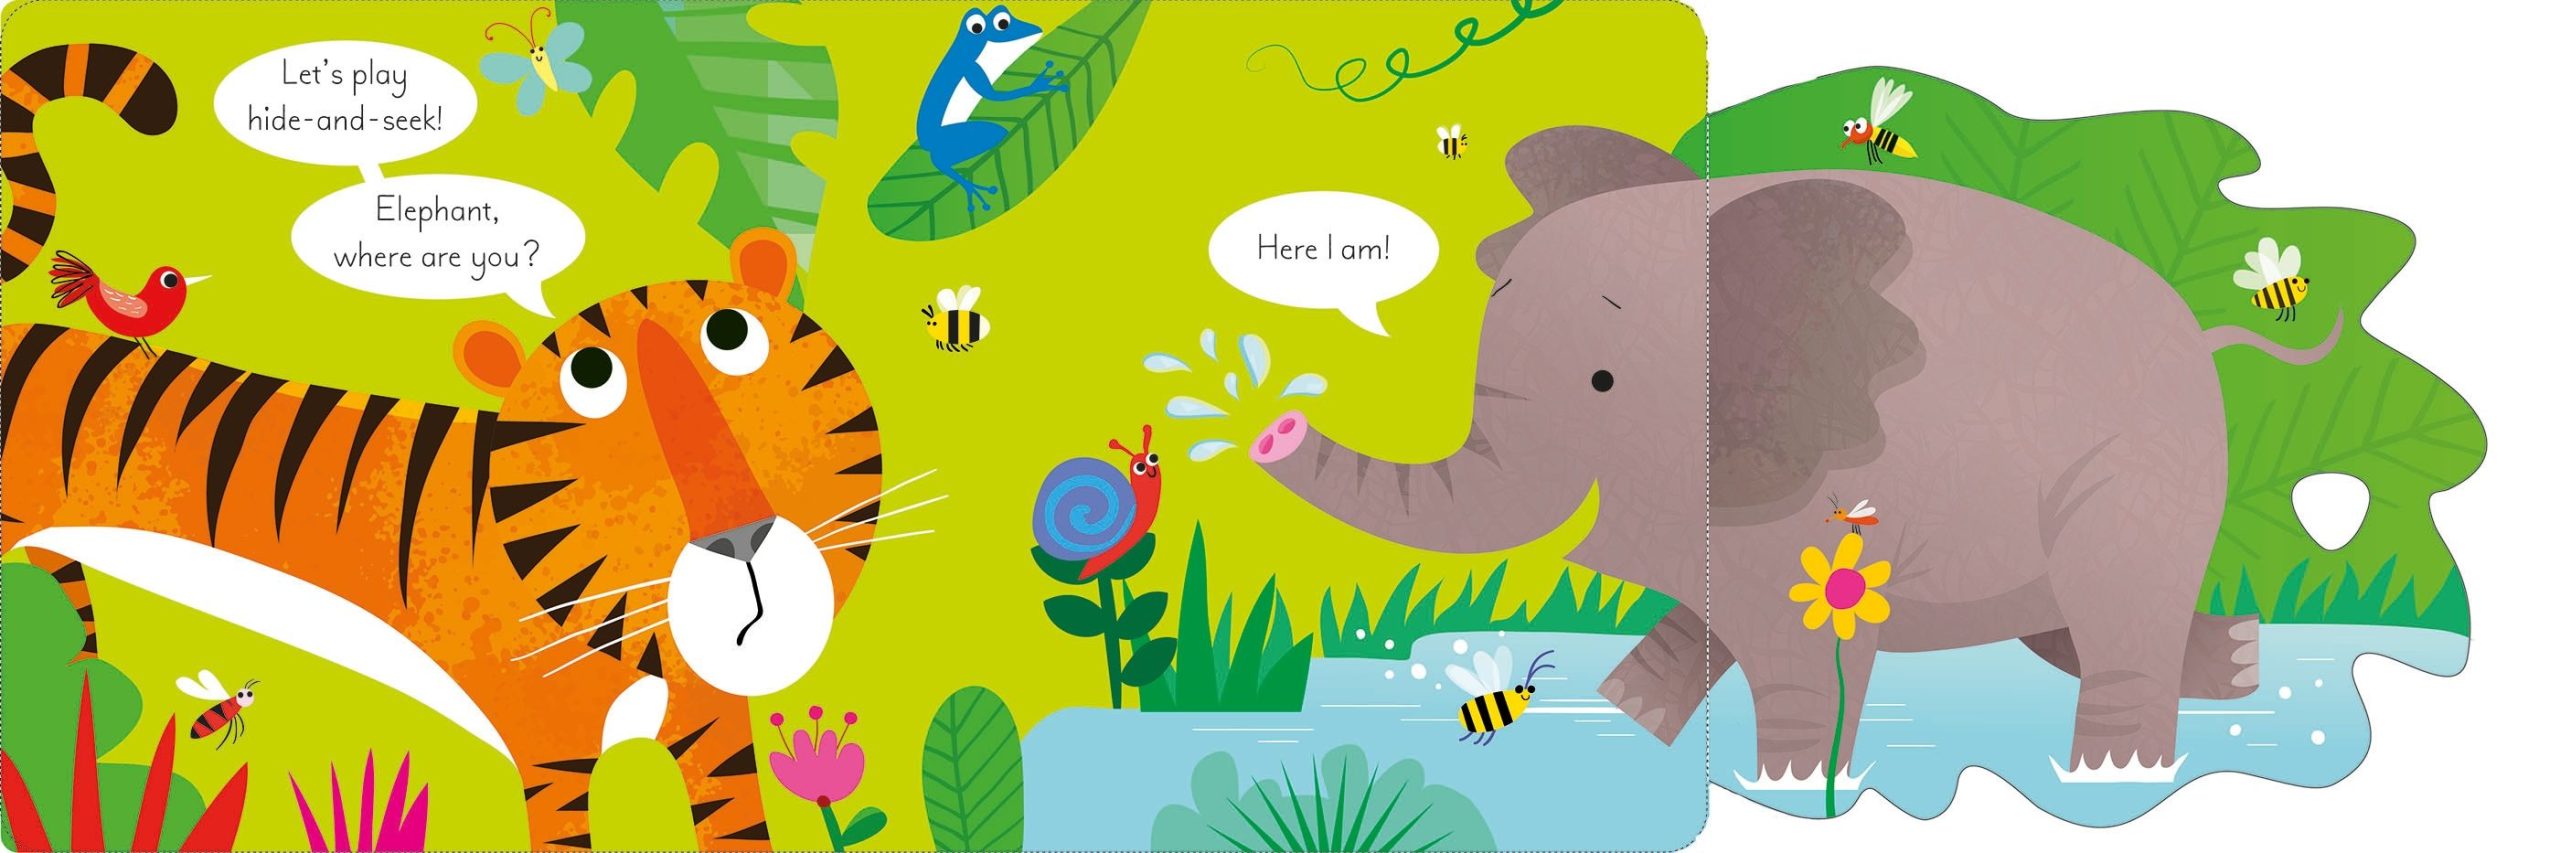 usborne-play-hide-and-seek-with-tiger-2